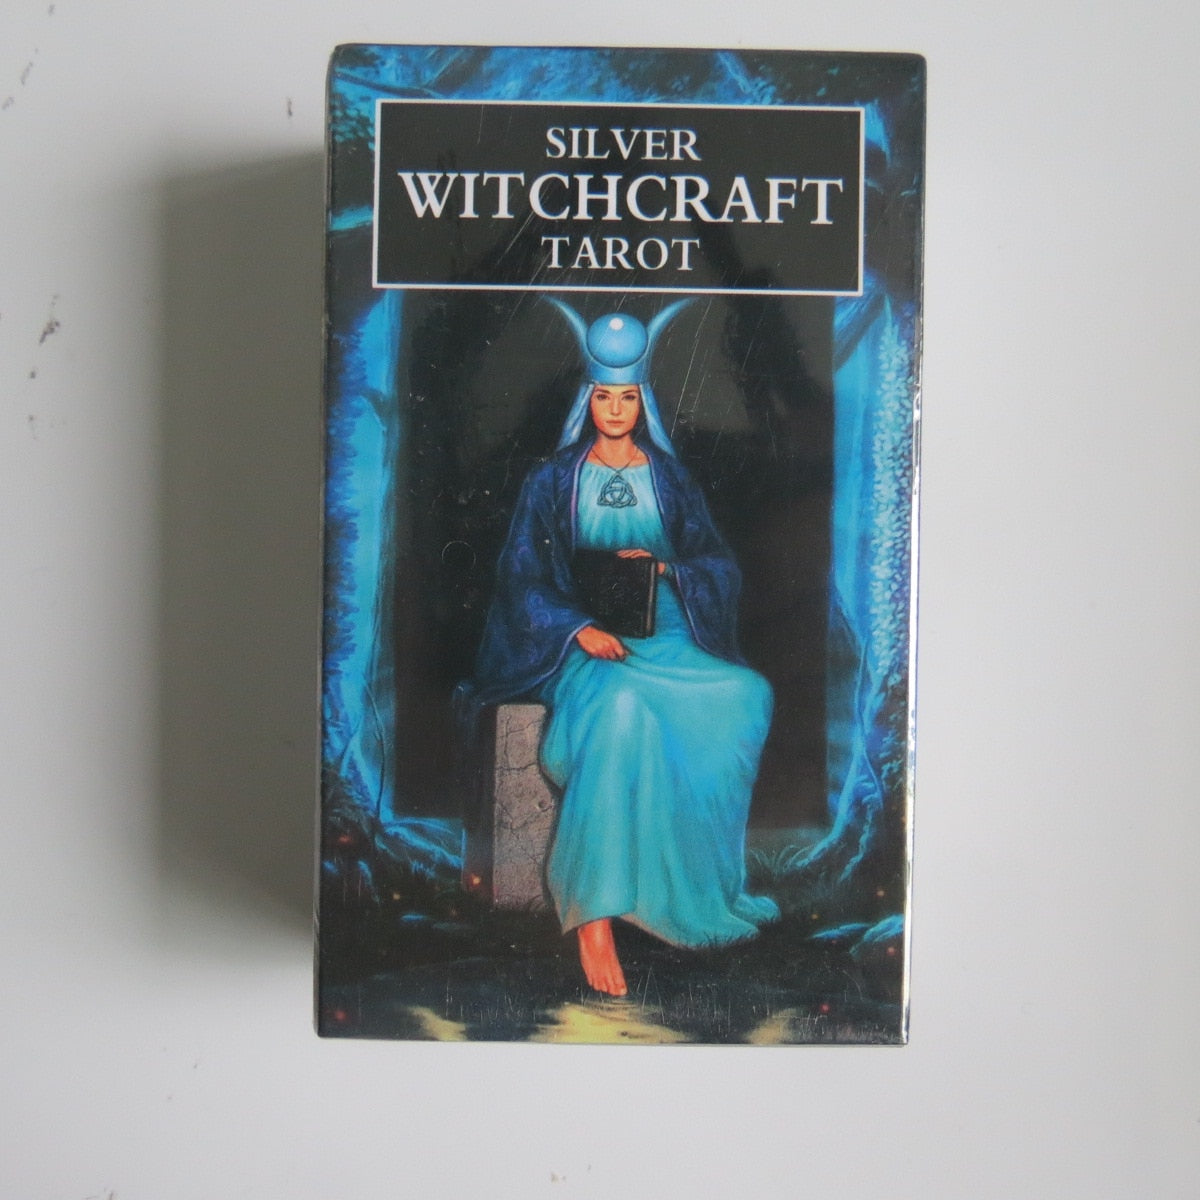 Silver Witchcraft Beautiful Tarot Oracles Cards For Mysterious Divination Entertainment